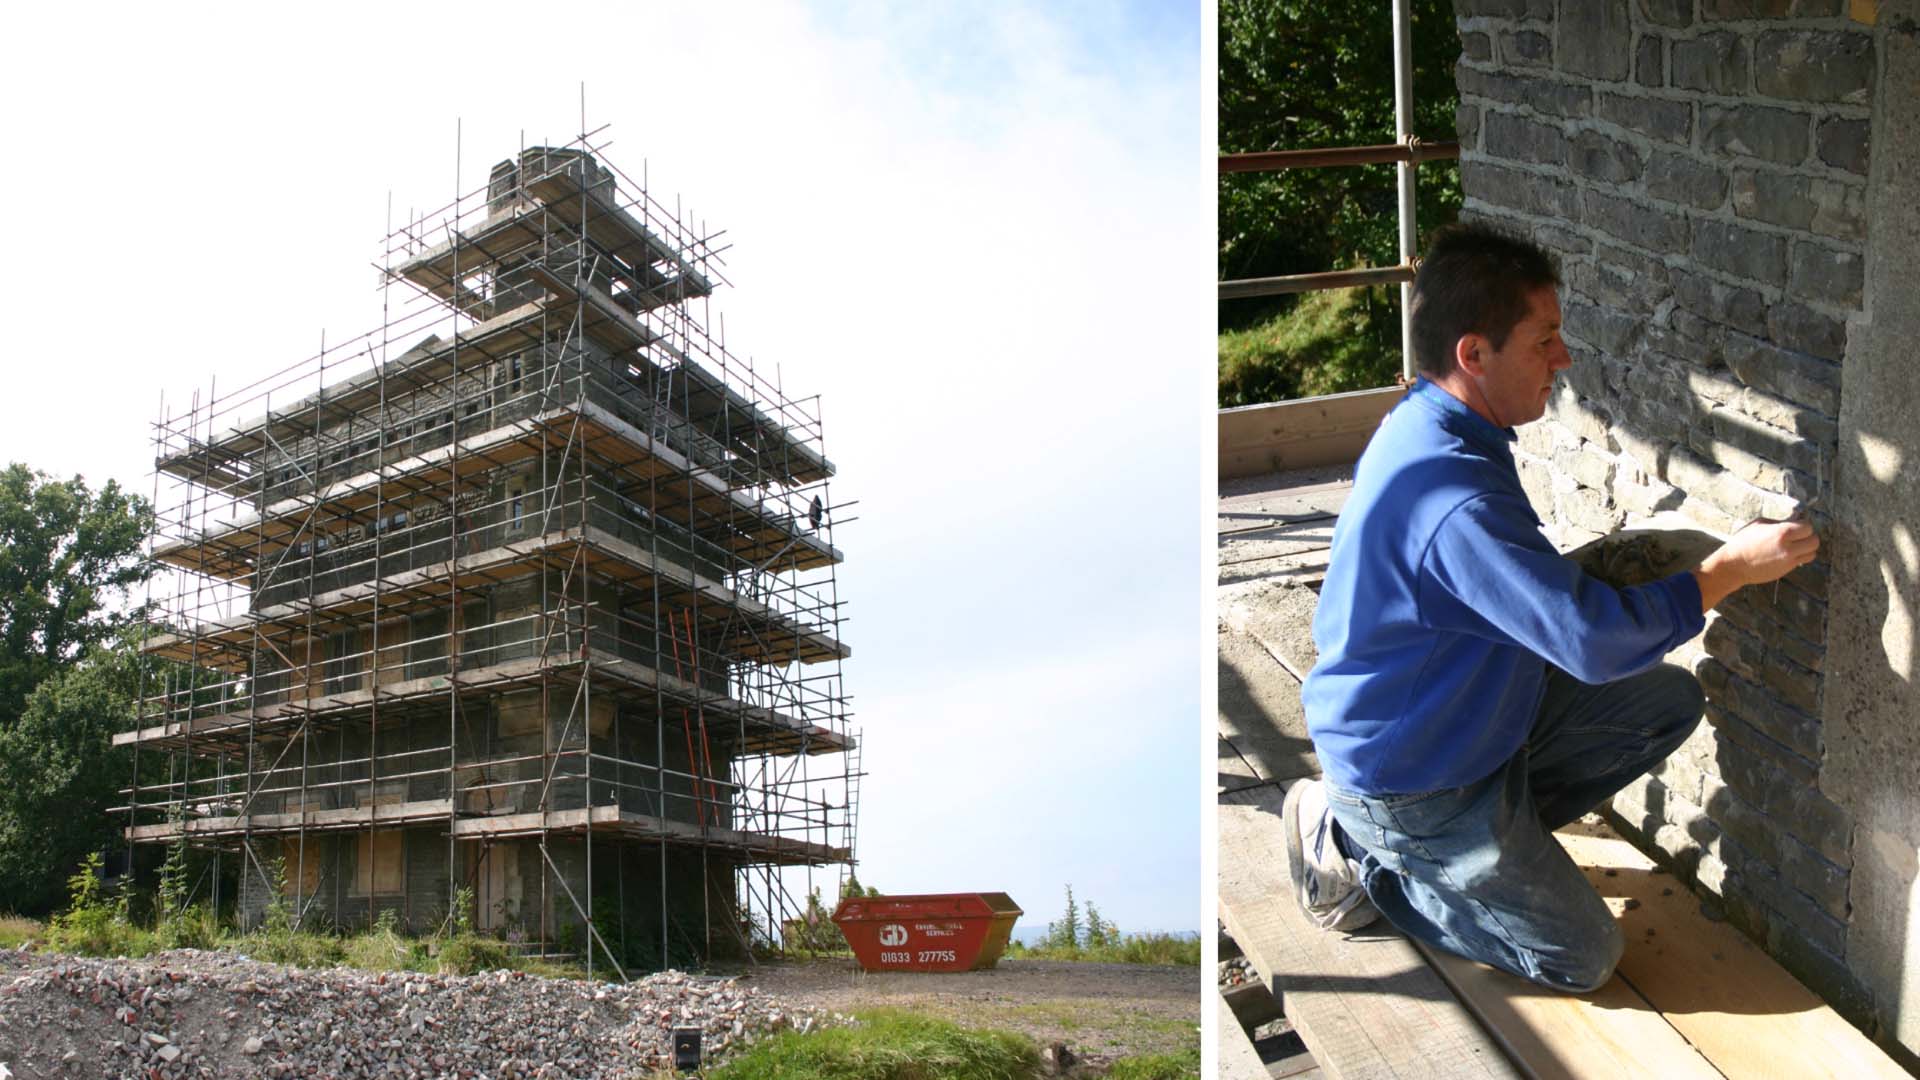 Two images, one showing the building covered in scaffolding, the other a man repointing the bricks